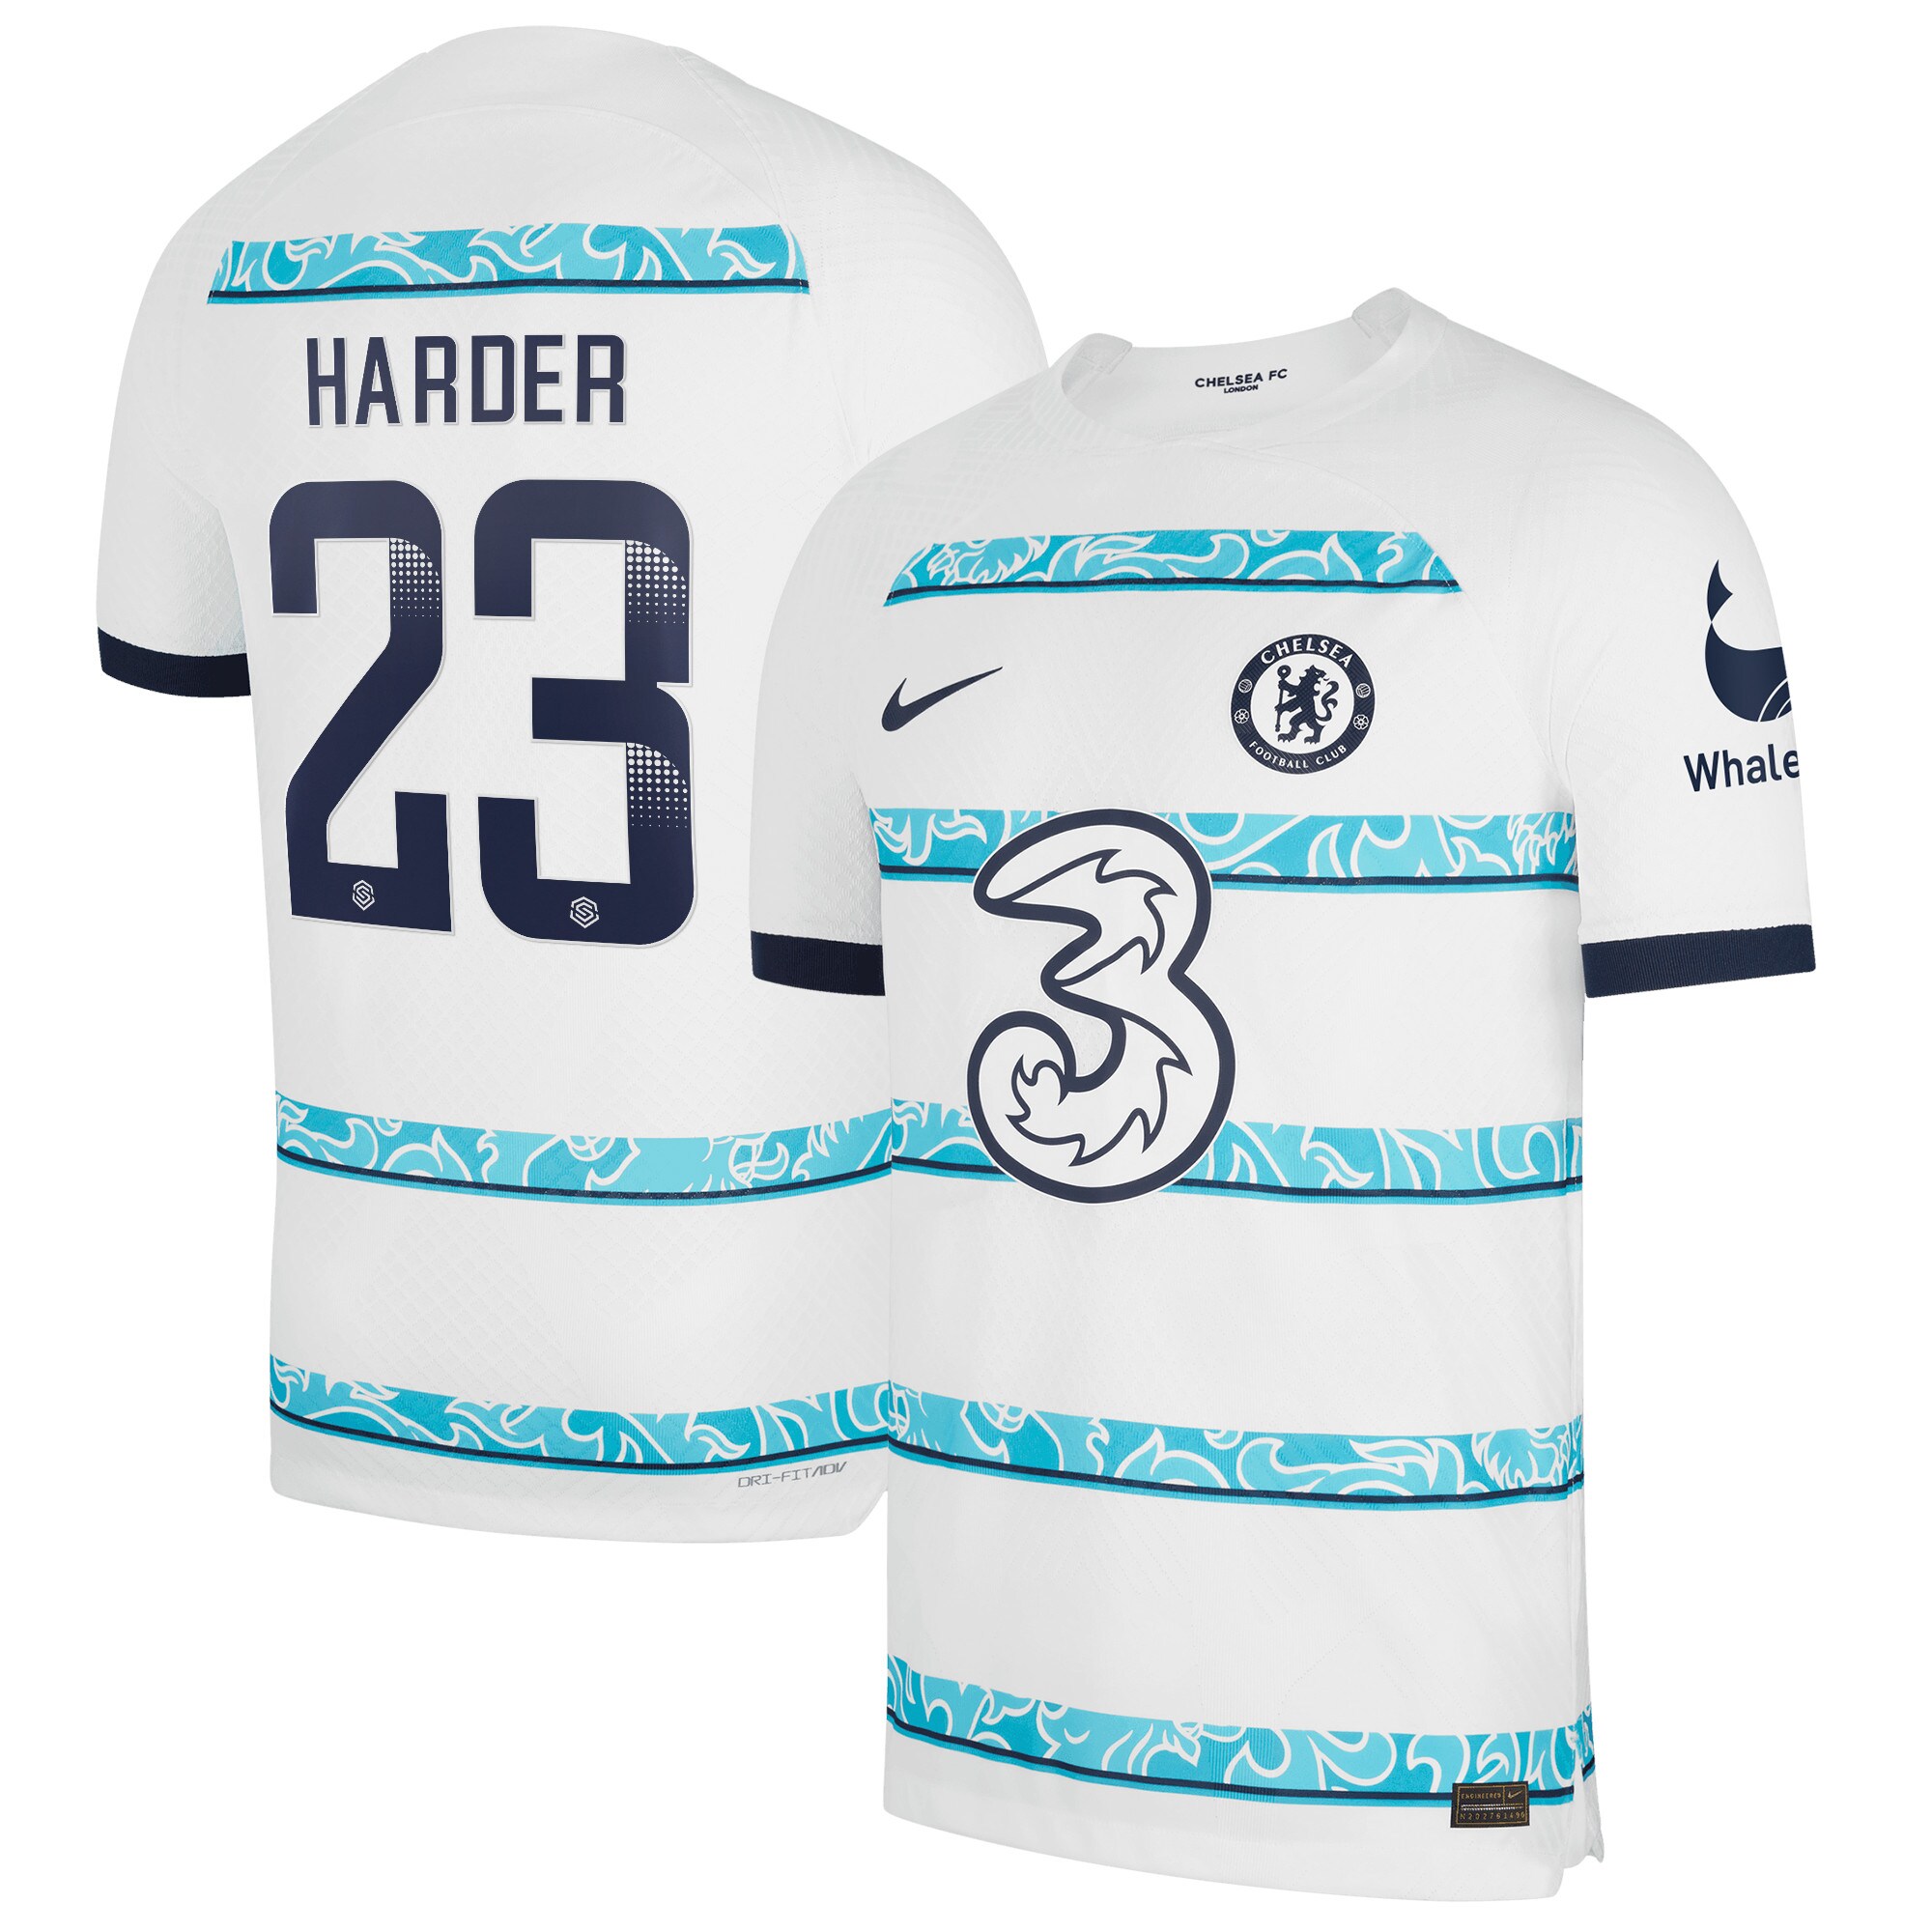 Chelsea WSL Away Vapor Match Shirt 2022-23 with Harder 23 printing